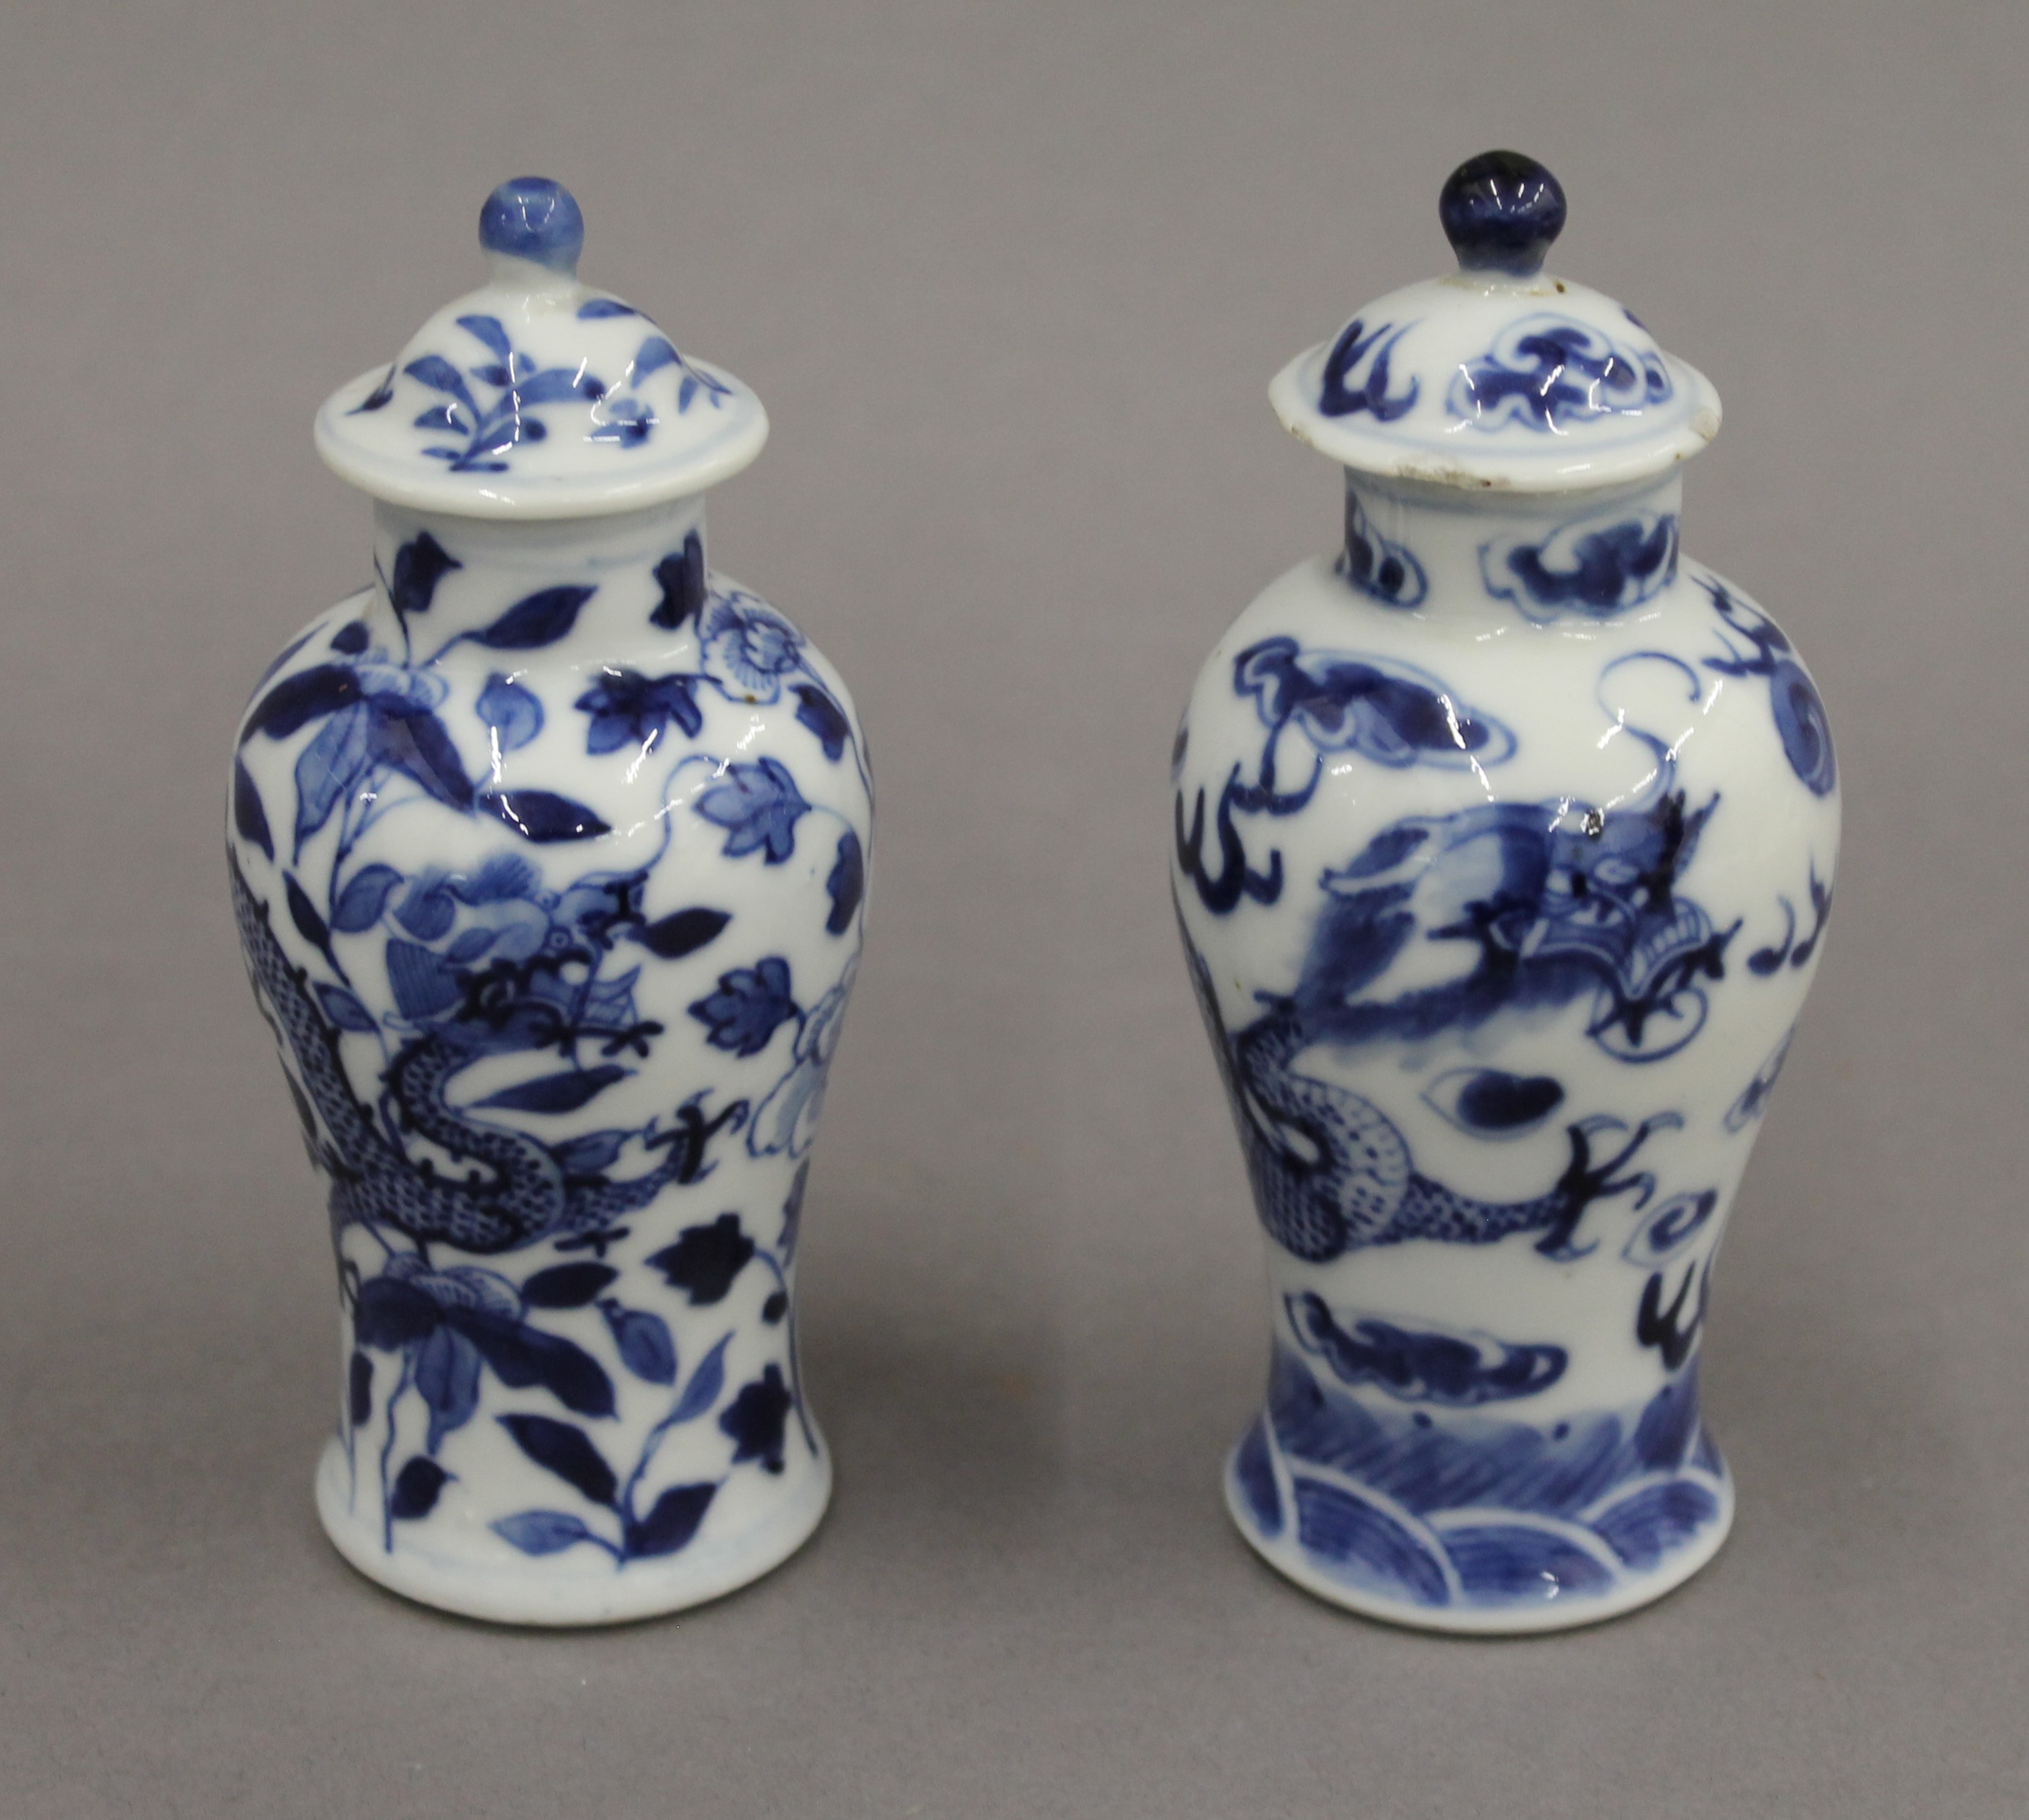 A pair of 19th century Chinese blue and white porcelain vases and covers, decorated with dragons.